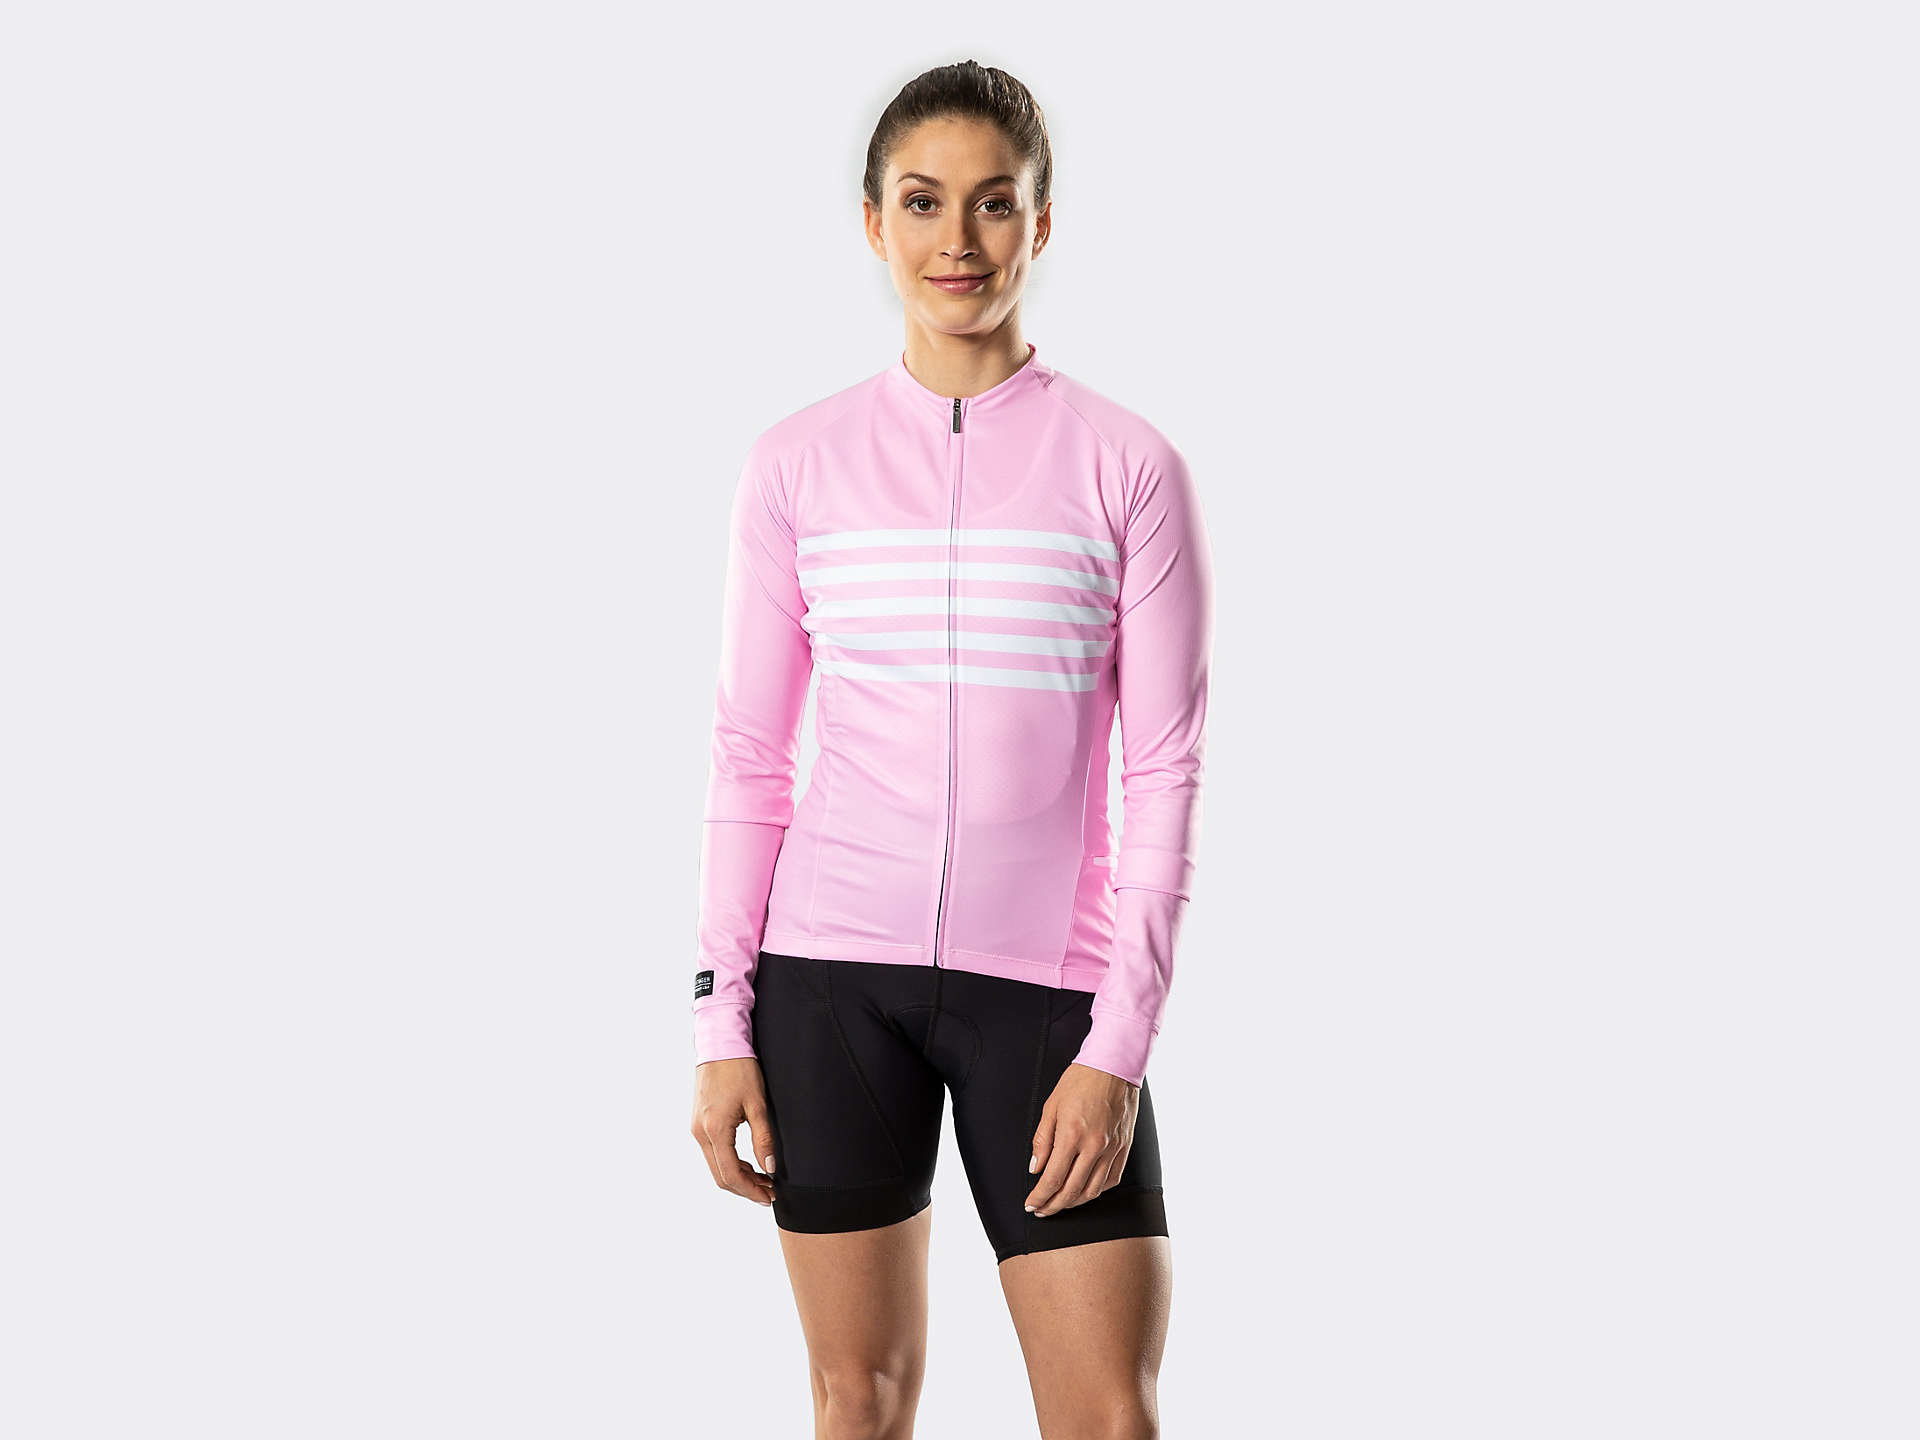 long sleeve bicycle jersey